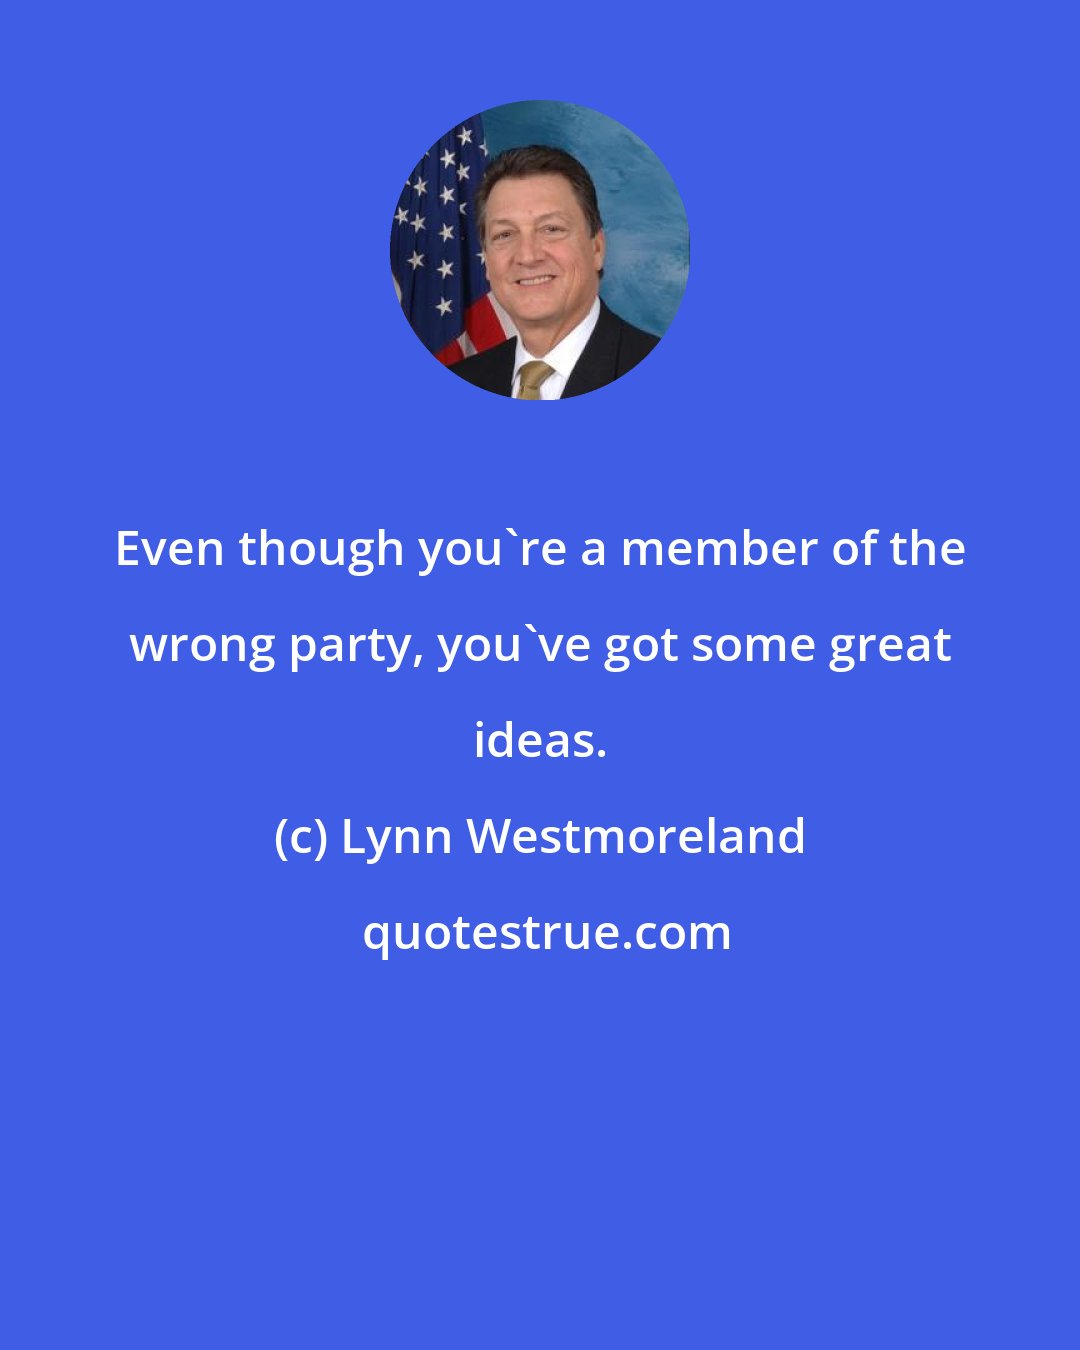 Lynn Westmoreland: Even though you're a member of the wrong party, you've got some great ideas.